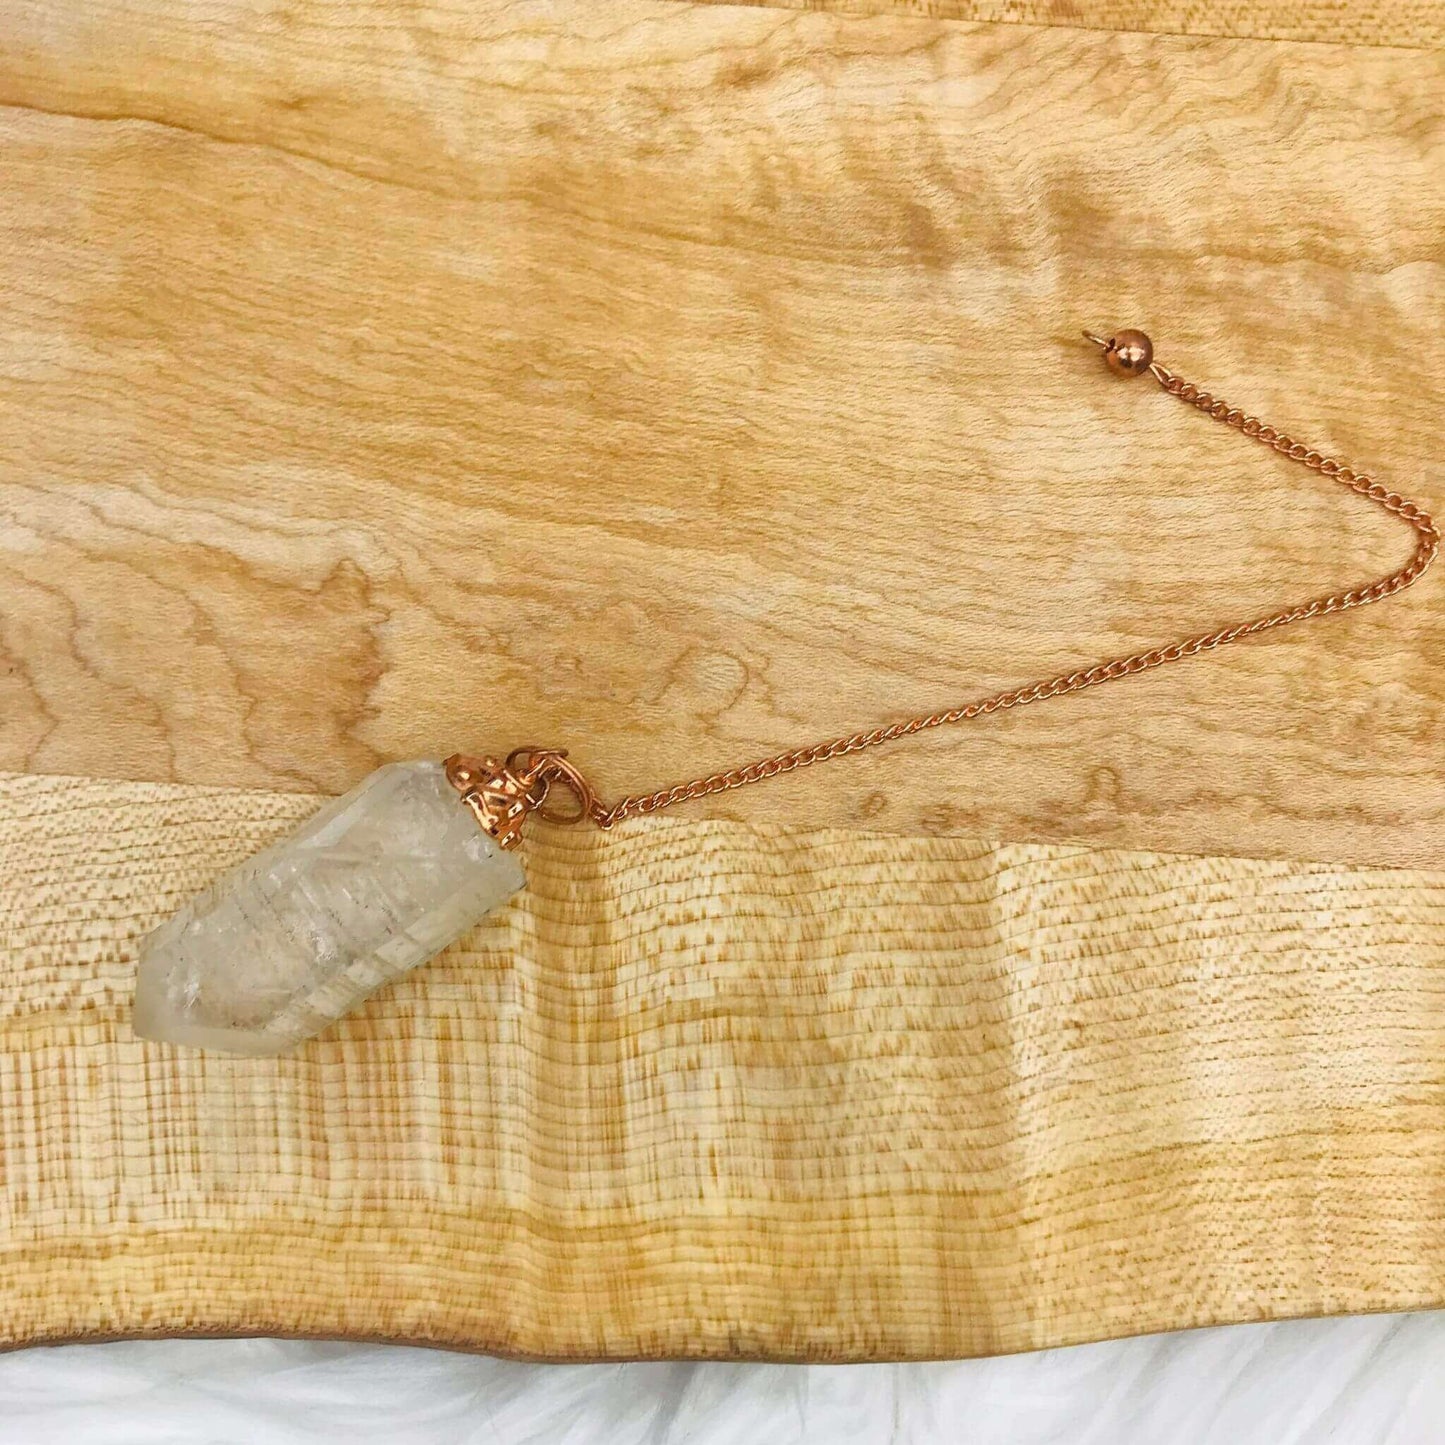 Clear Quartz Rough Crystal Point with Copper Chain Pendulum at $20 only from Spiral Rain